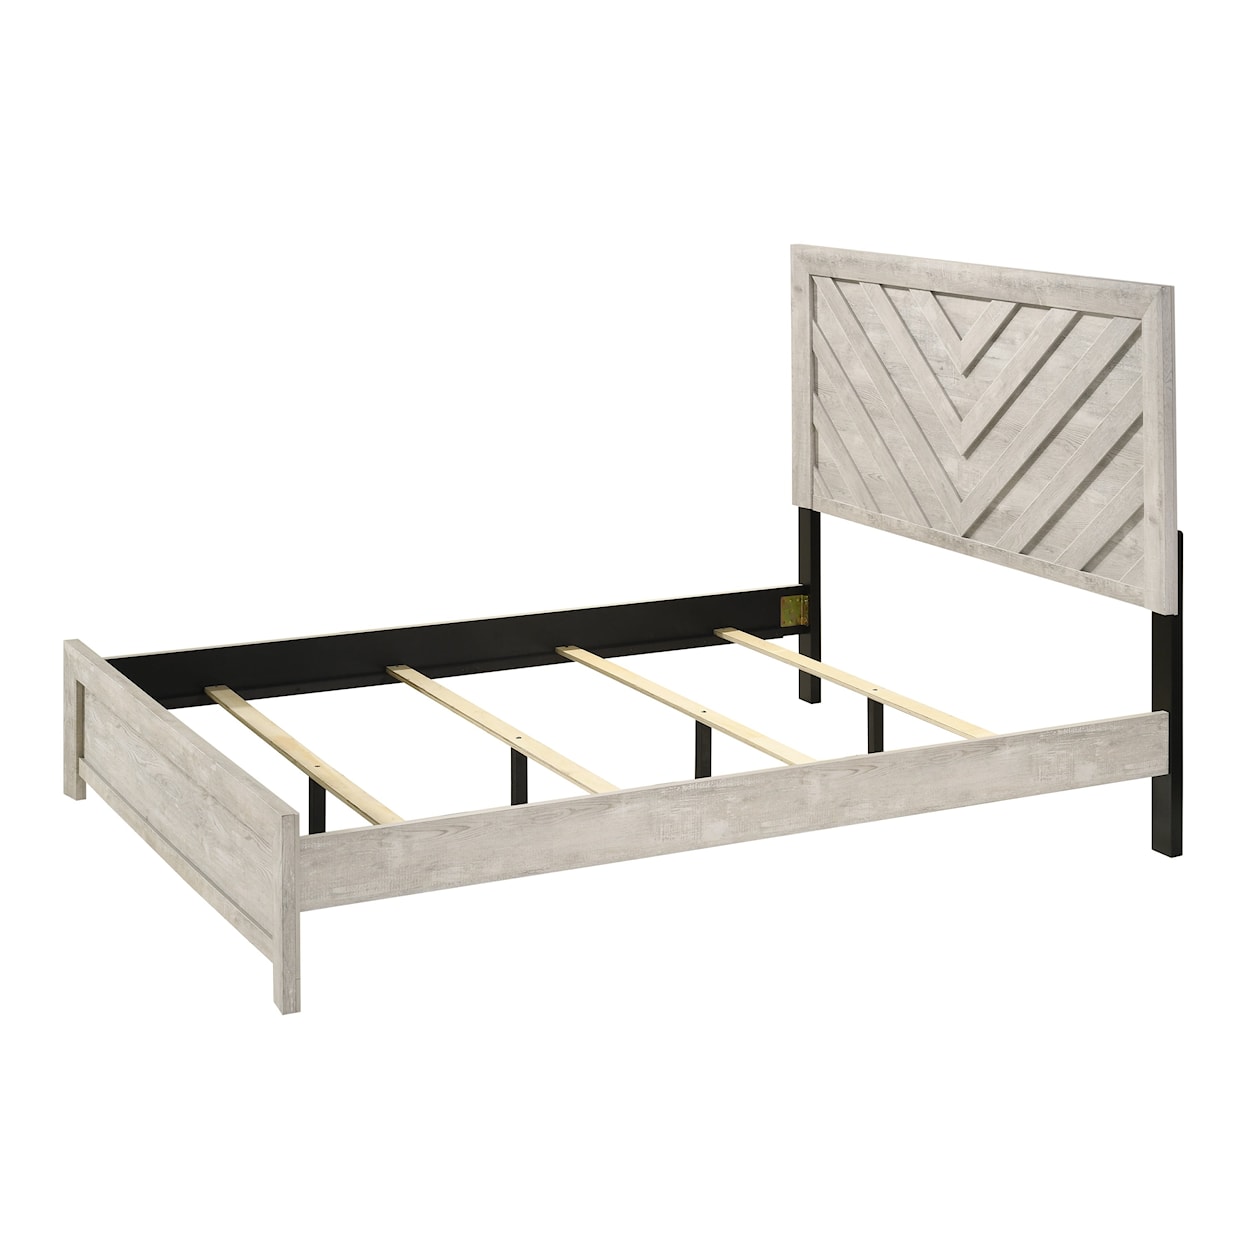 CM Valor Twin Panel Bed